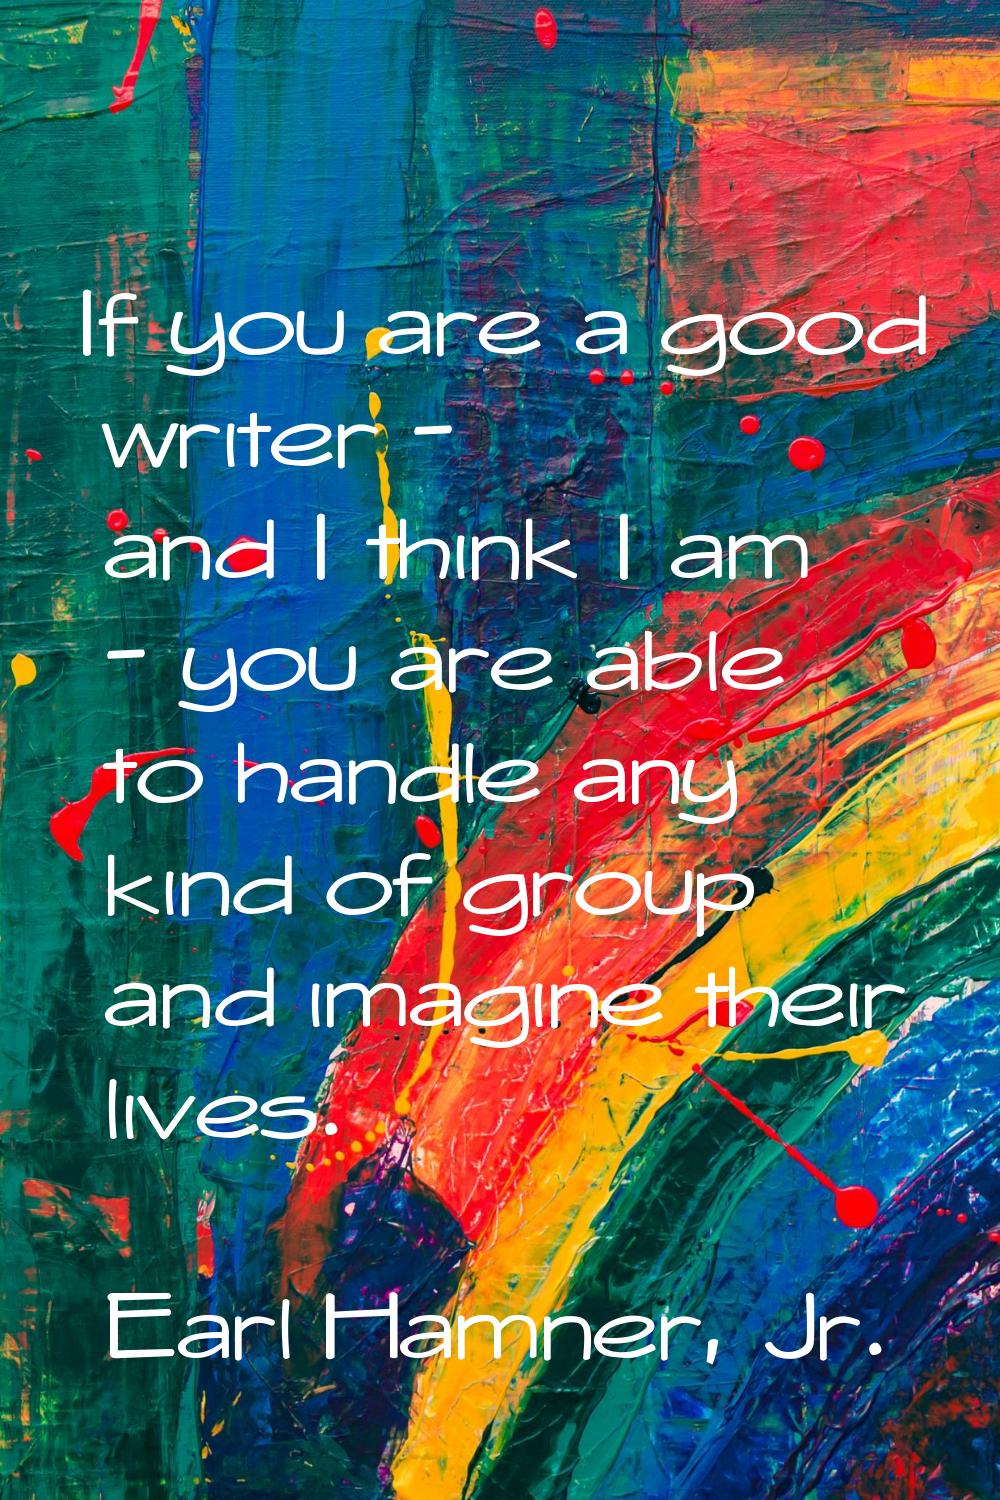 If you are a good writer - and I think I am - you are able to handle any kind of group and imagine 